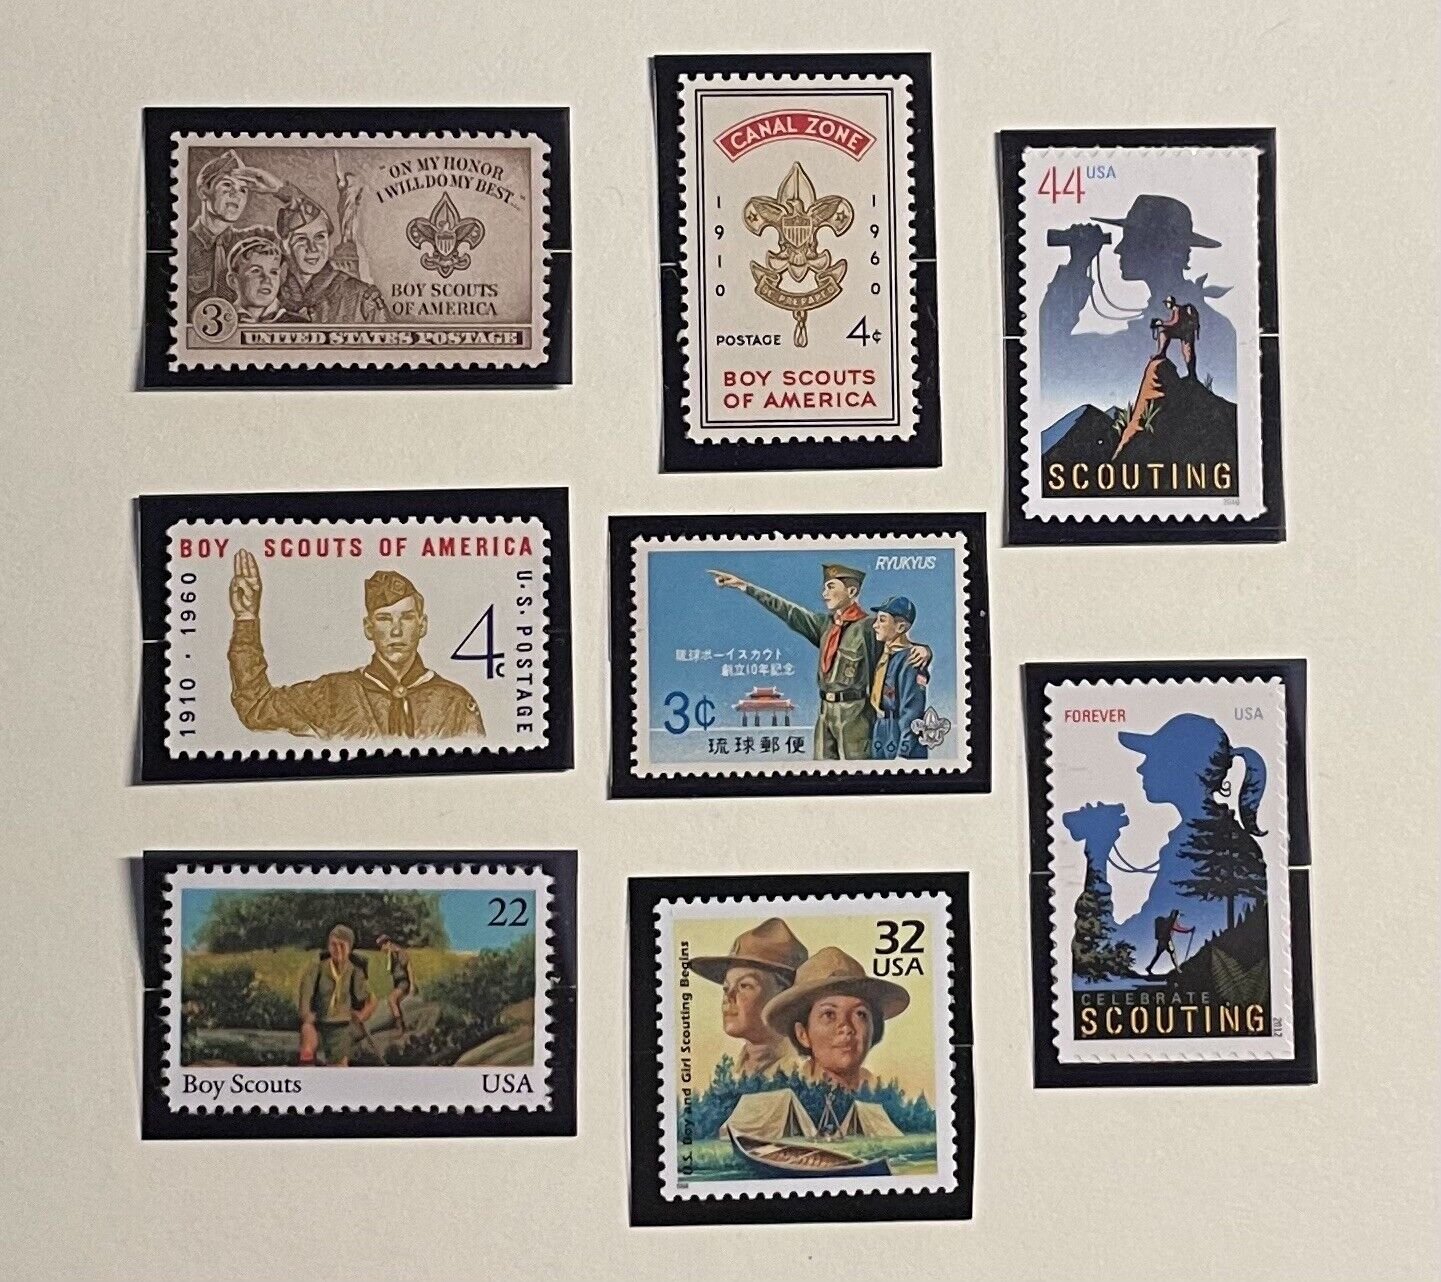 Scouts BSA Boy Scouts Set of 8 US Issued Scouting Stamps wMOUNTS Gift Idea MINT